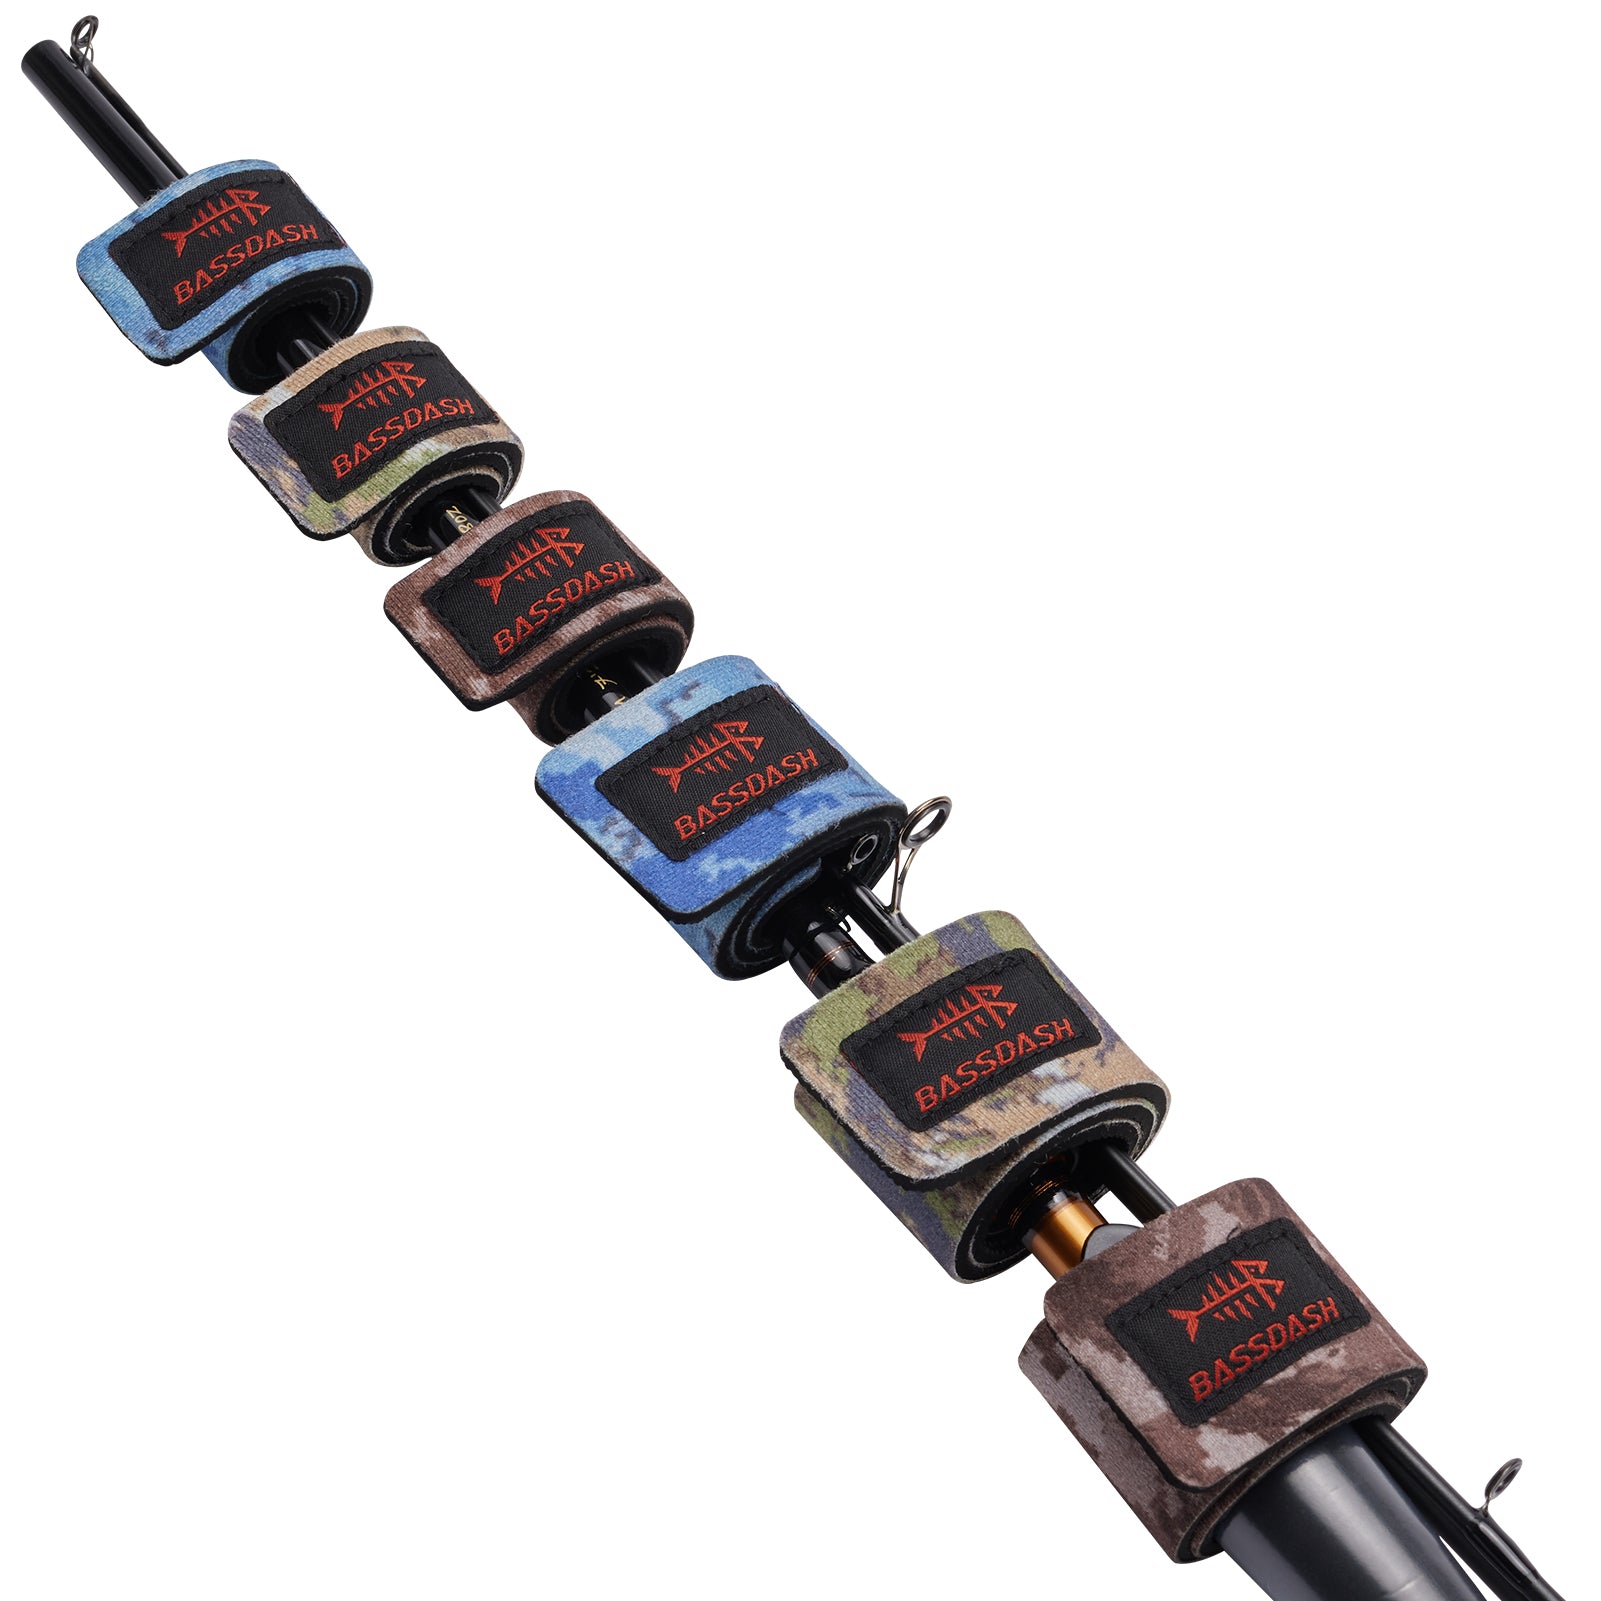 Bassdash Fishing Rod Straps Stretchy Waterproof Wrap Ties for